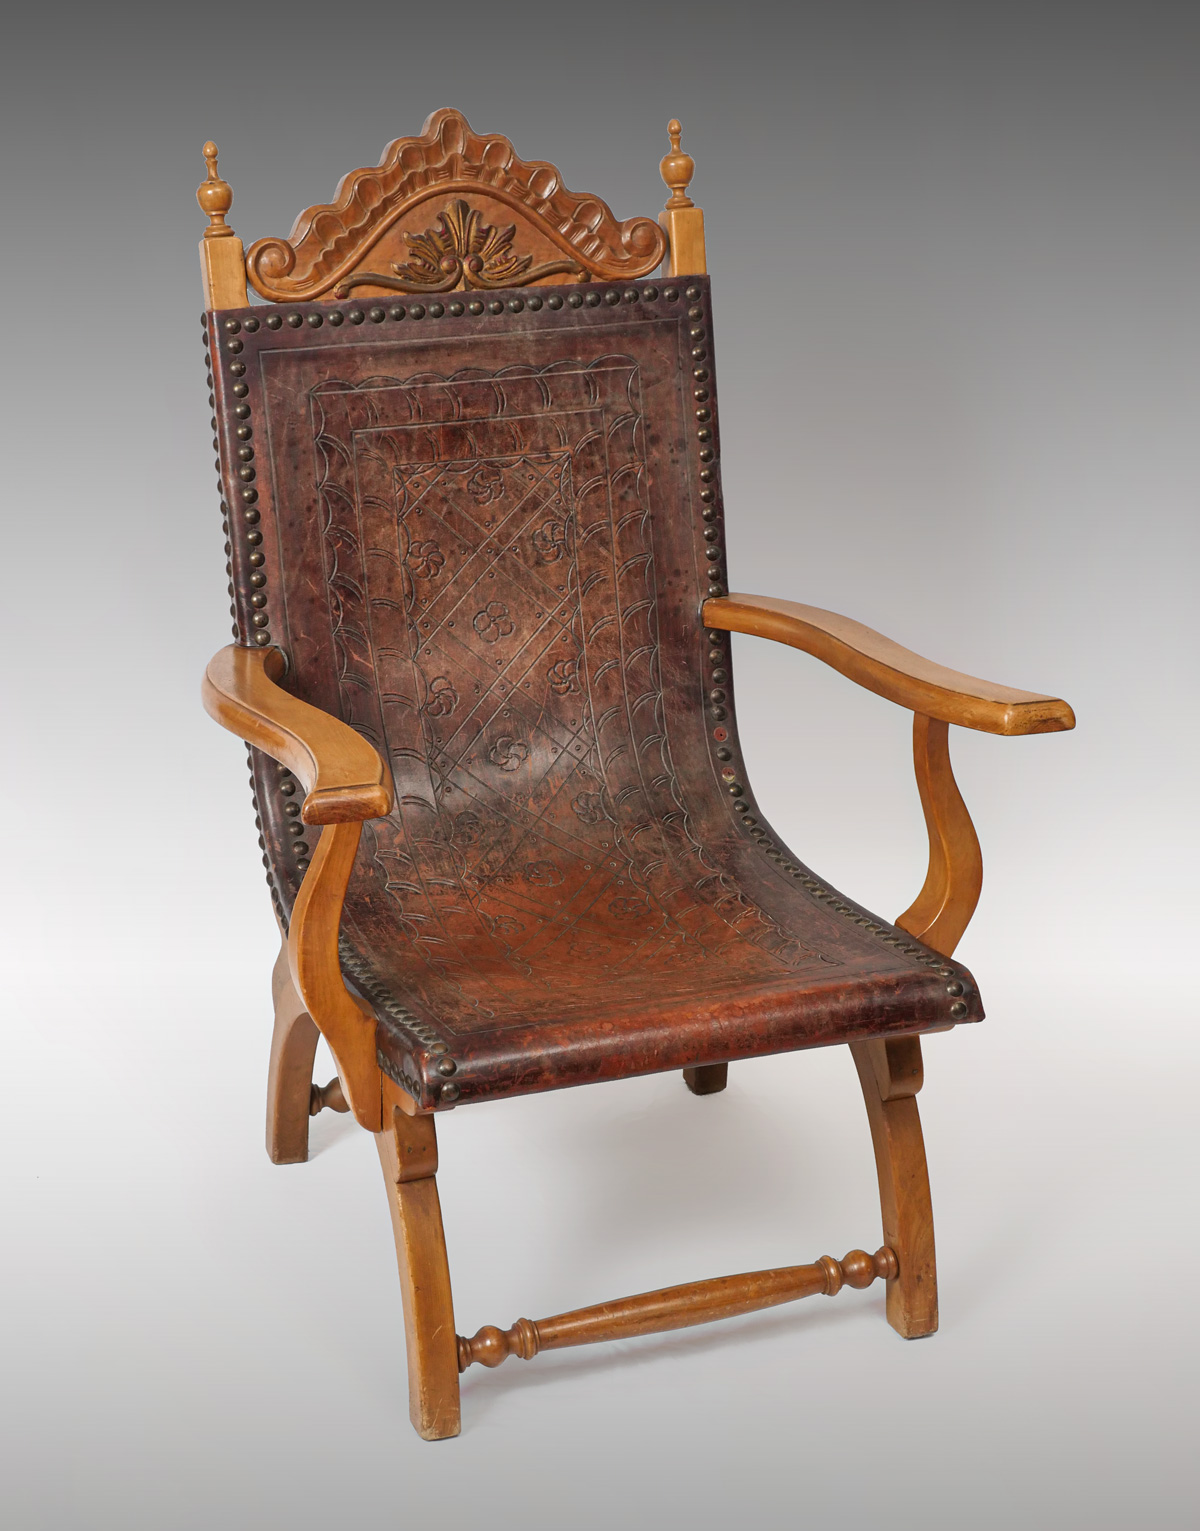 SPANISH EMBOSSED LEATHER CHAIR: